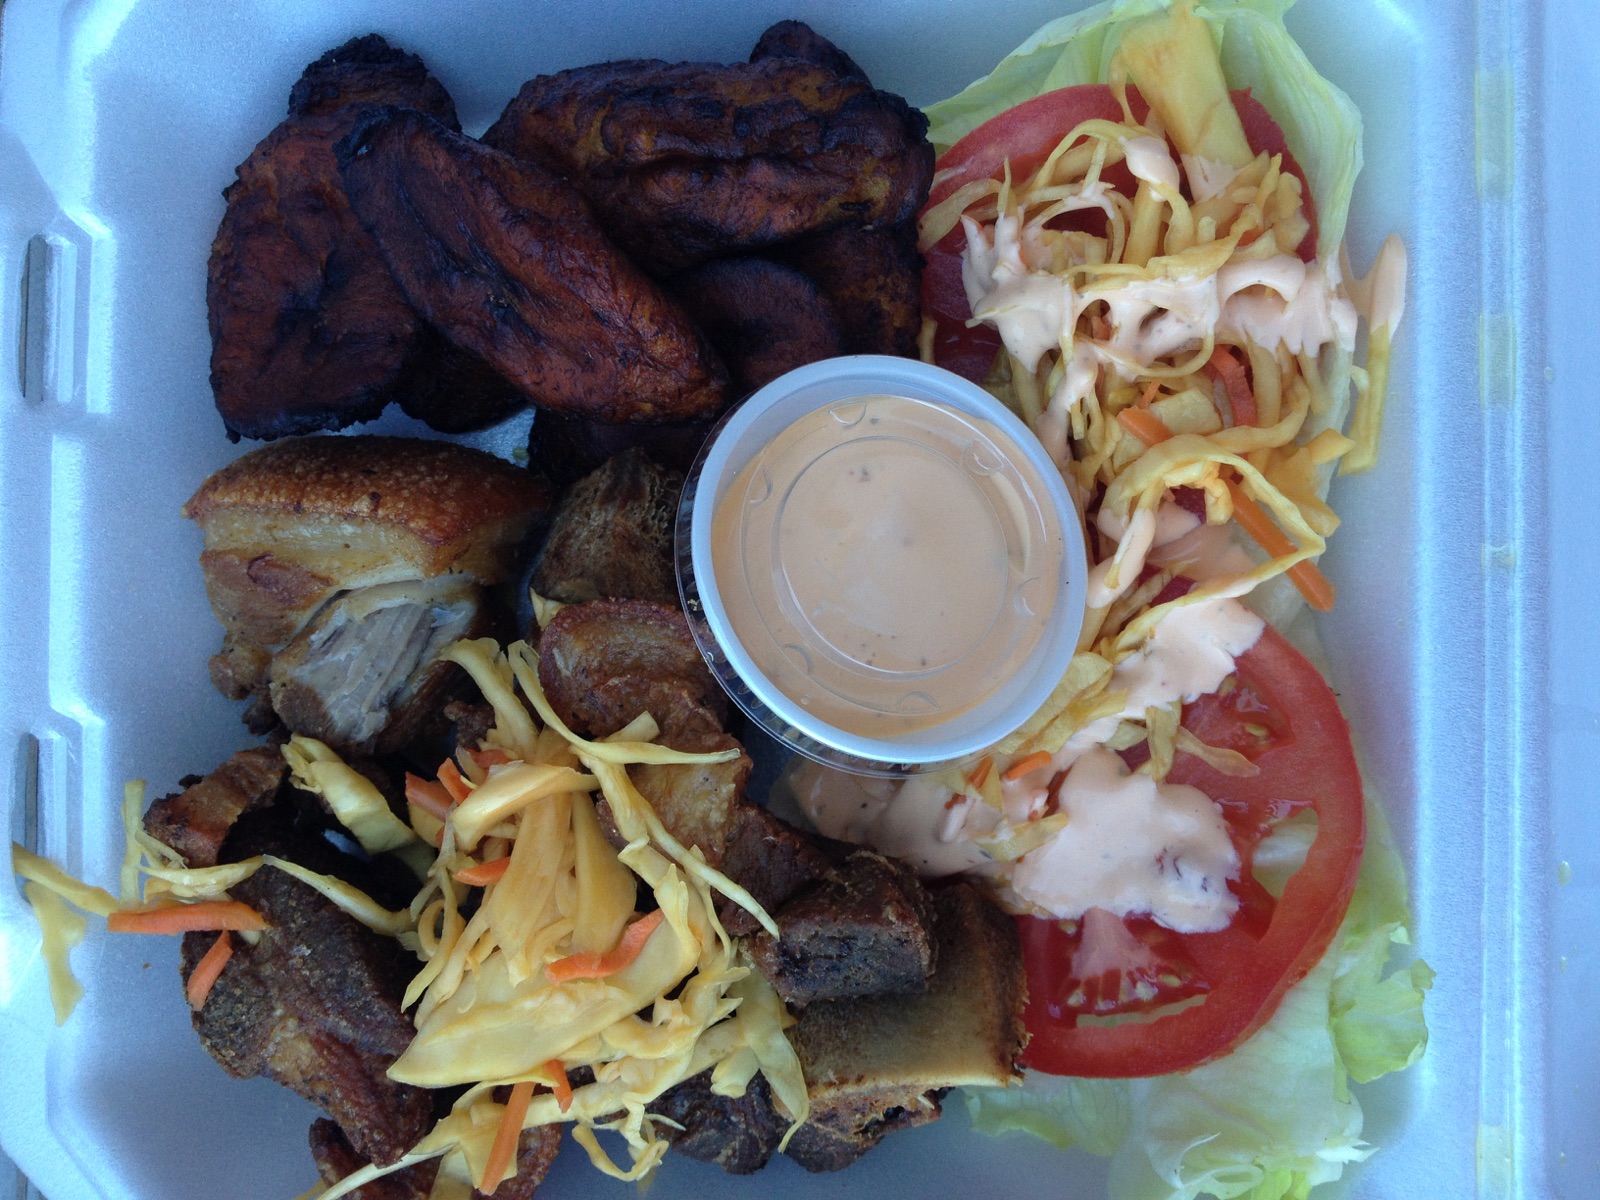 A generous helping of griot from King Queen Haitian Cuisine